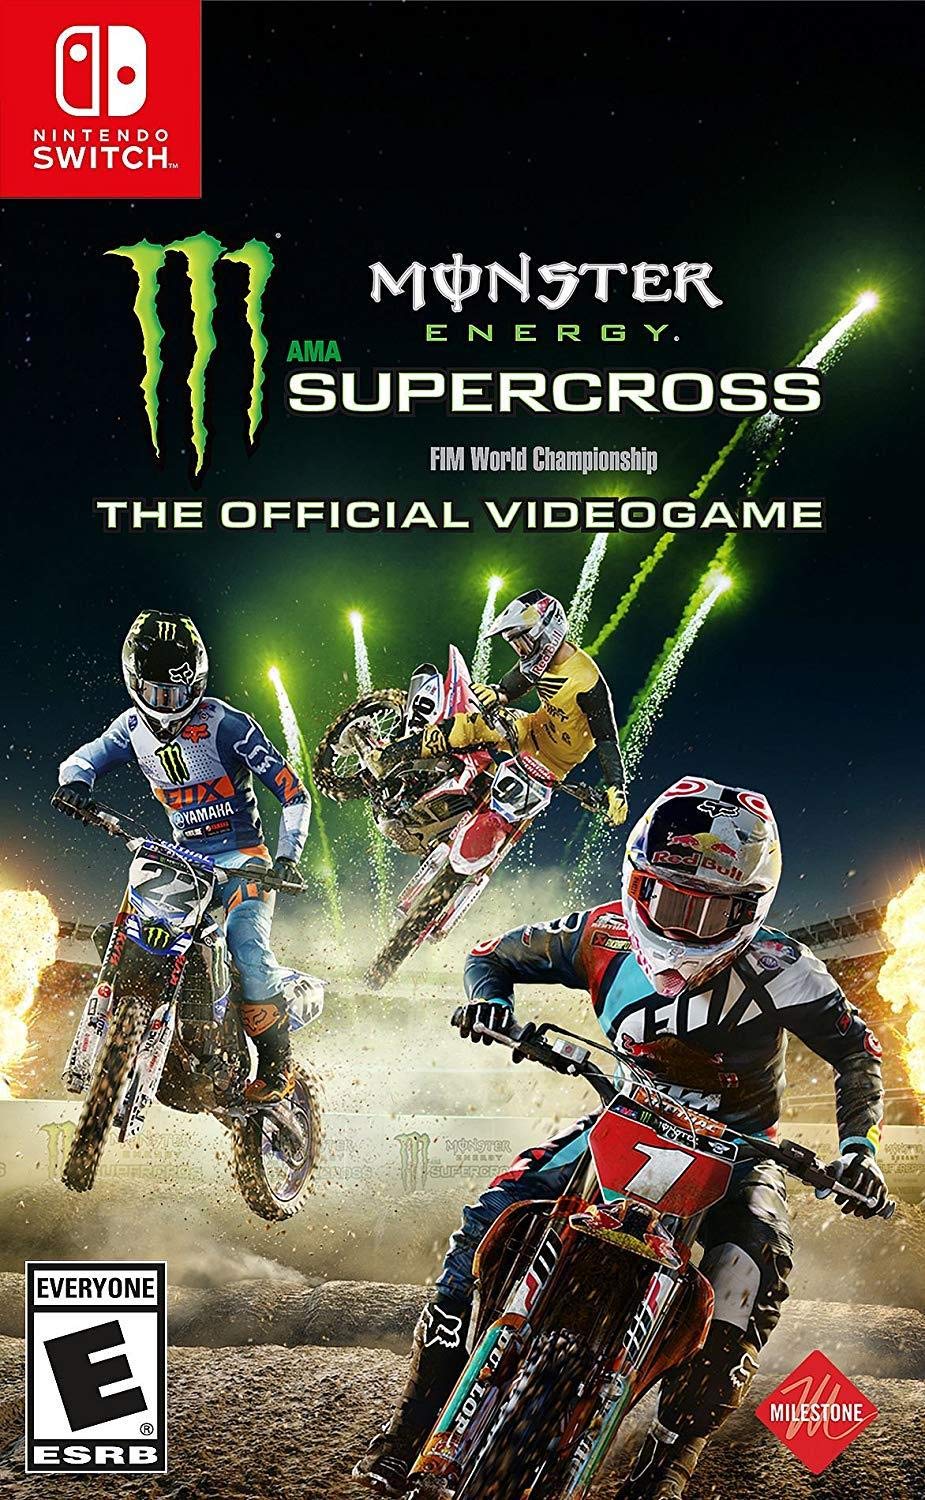 Monster Energy Supercross: The Official Videogame (Nintendo Switch) $10 + Free Shipping w/ Prime or on orders over $25